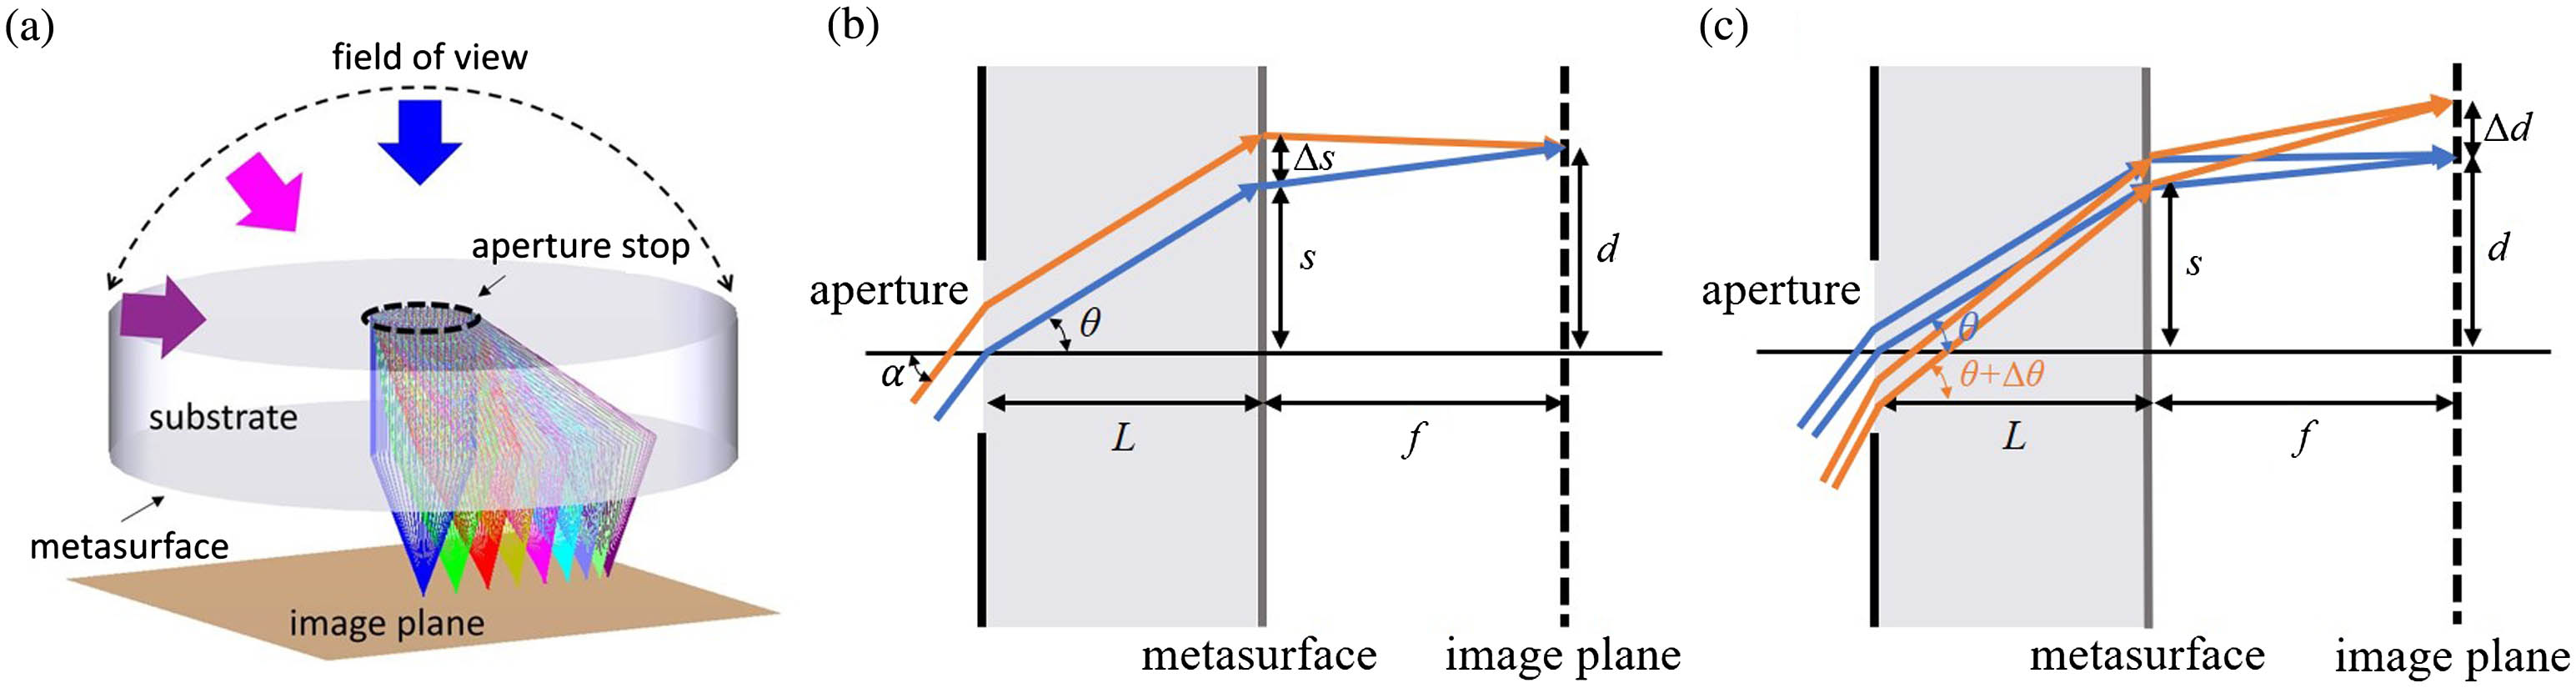 Schematic illustration of WFOV metalens design. (a) 3D structure. (b) Illustration of the phase profile derivation. (c) Illustration of the image height derivation. (a) is reprinted with permission from the American Chemical Society[23].